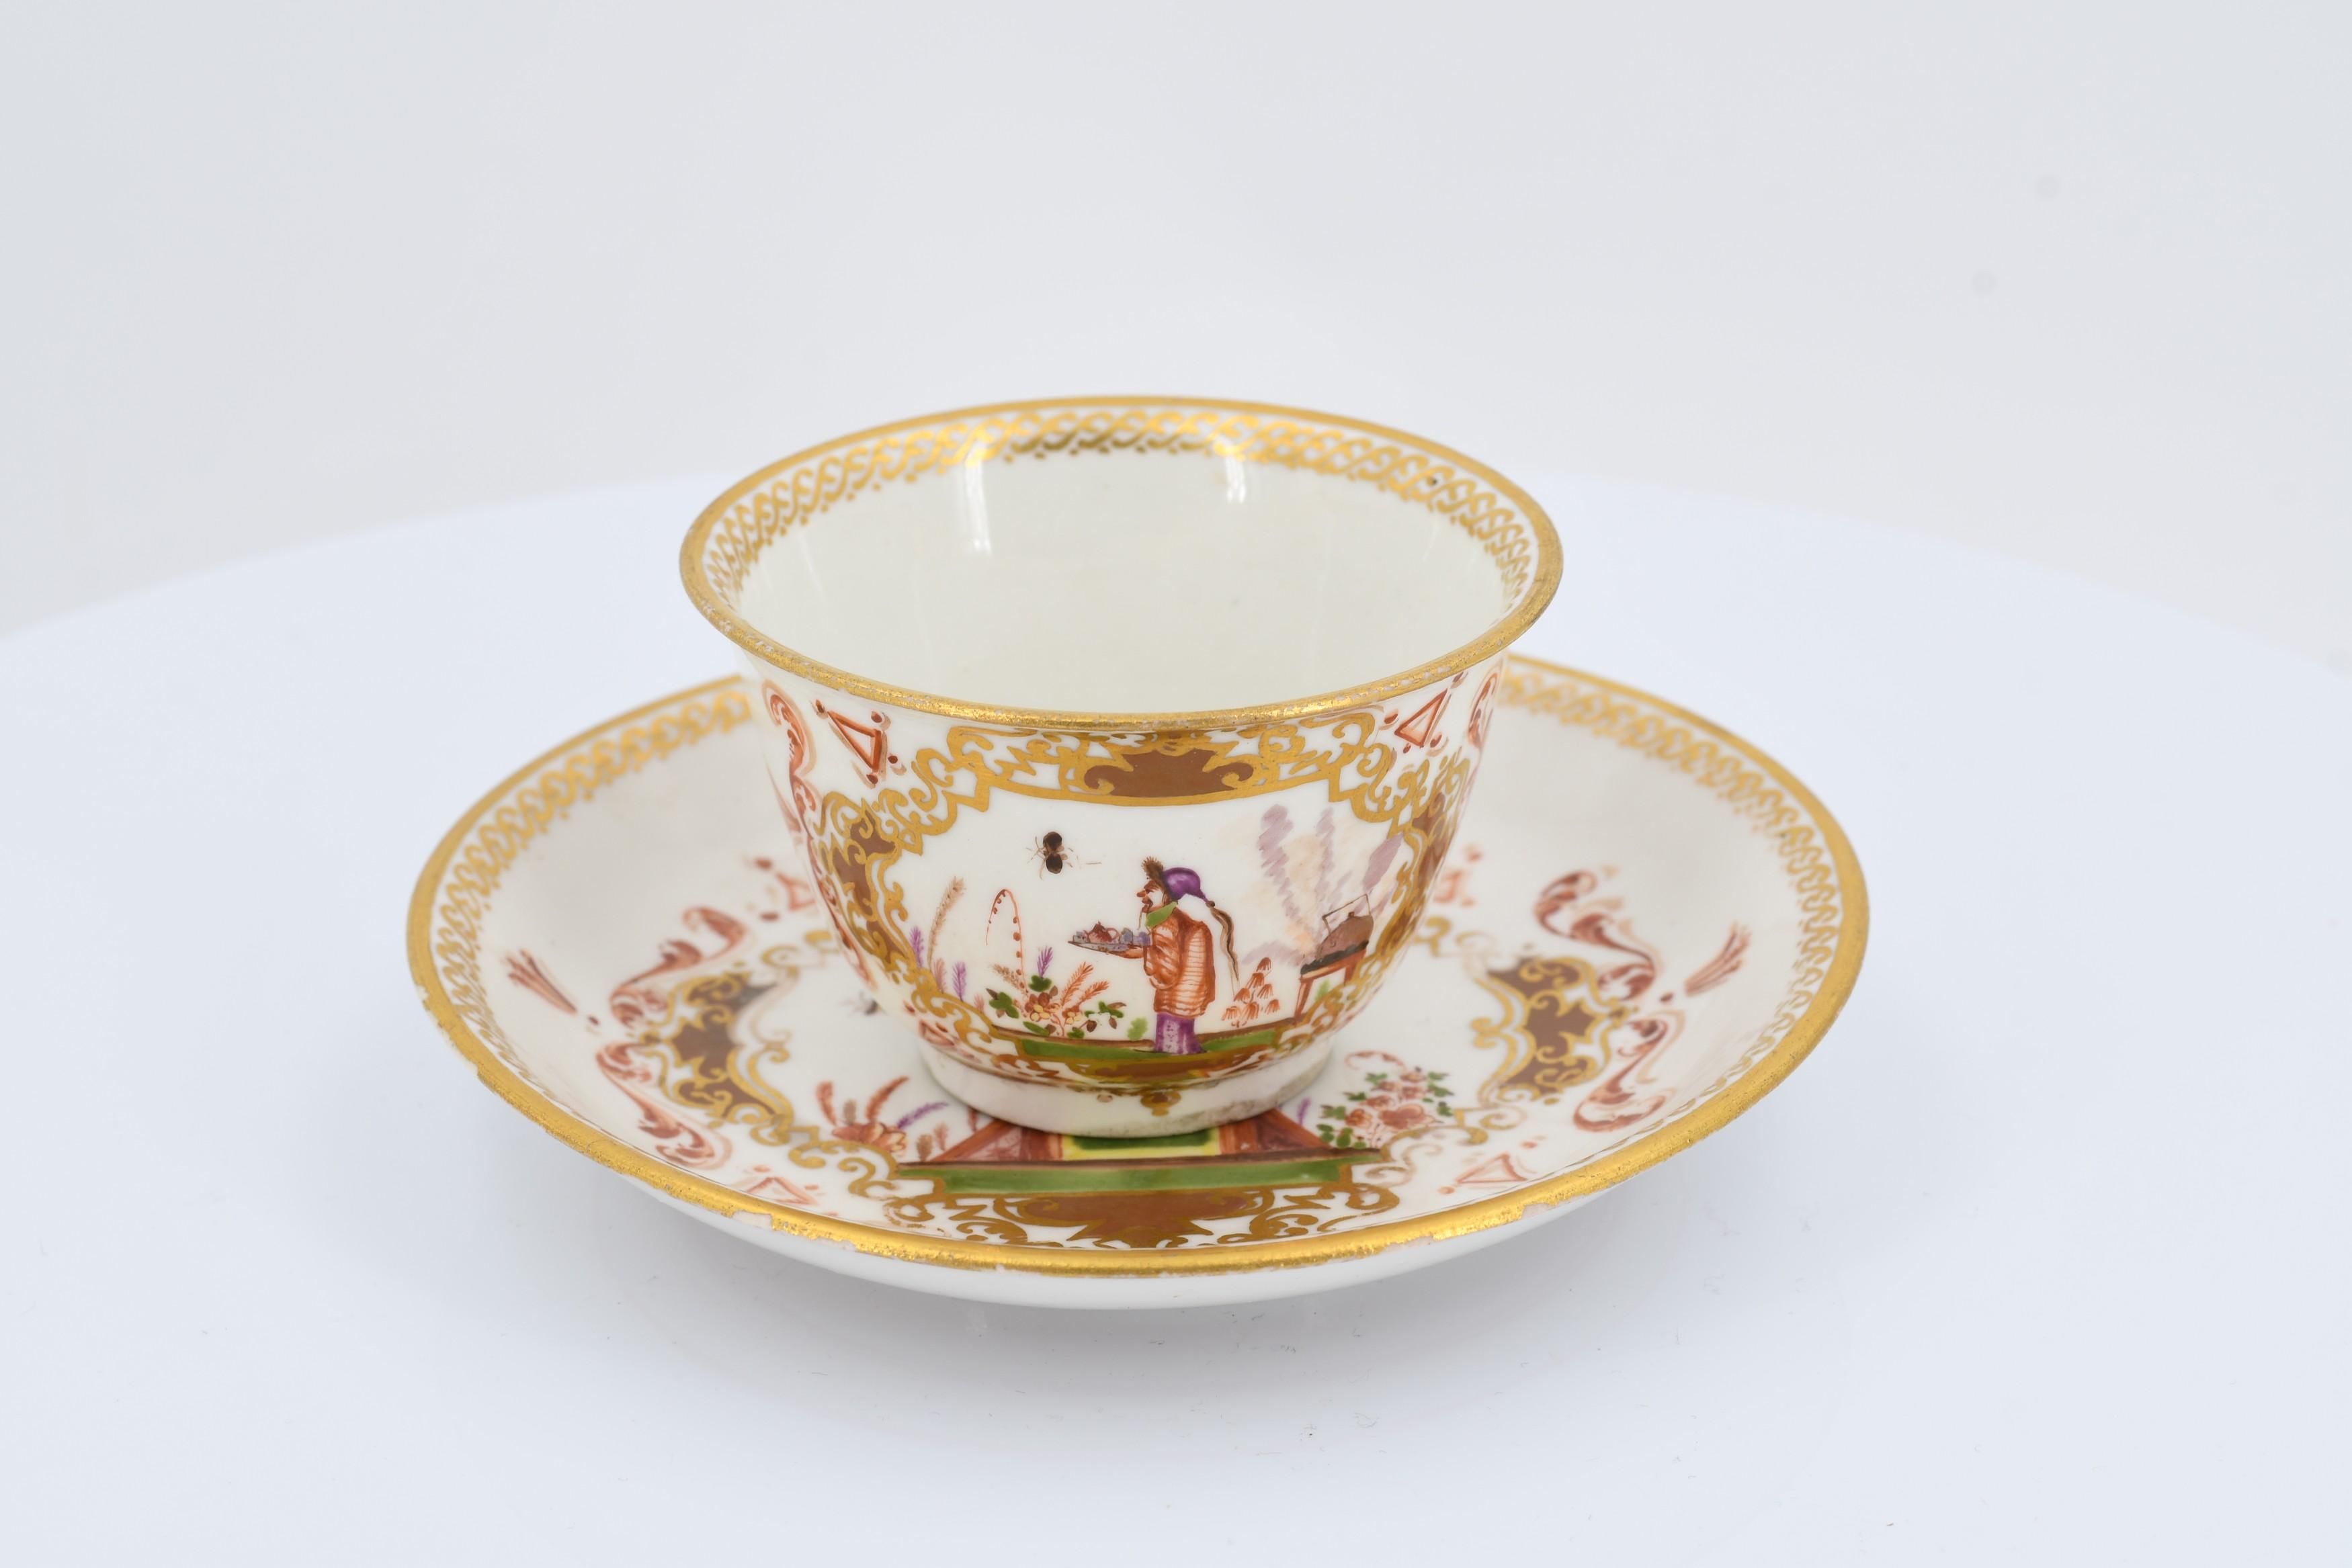 Tea bowl and saucer with chinoiseries - Image 2 of 7